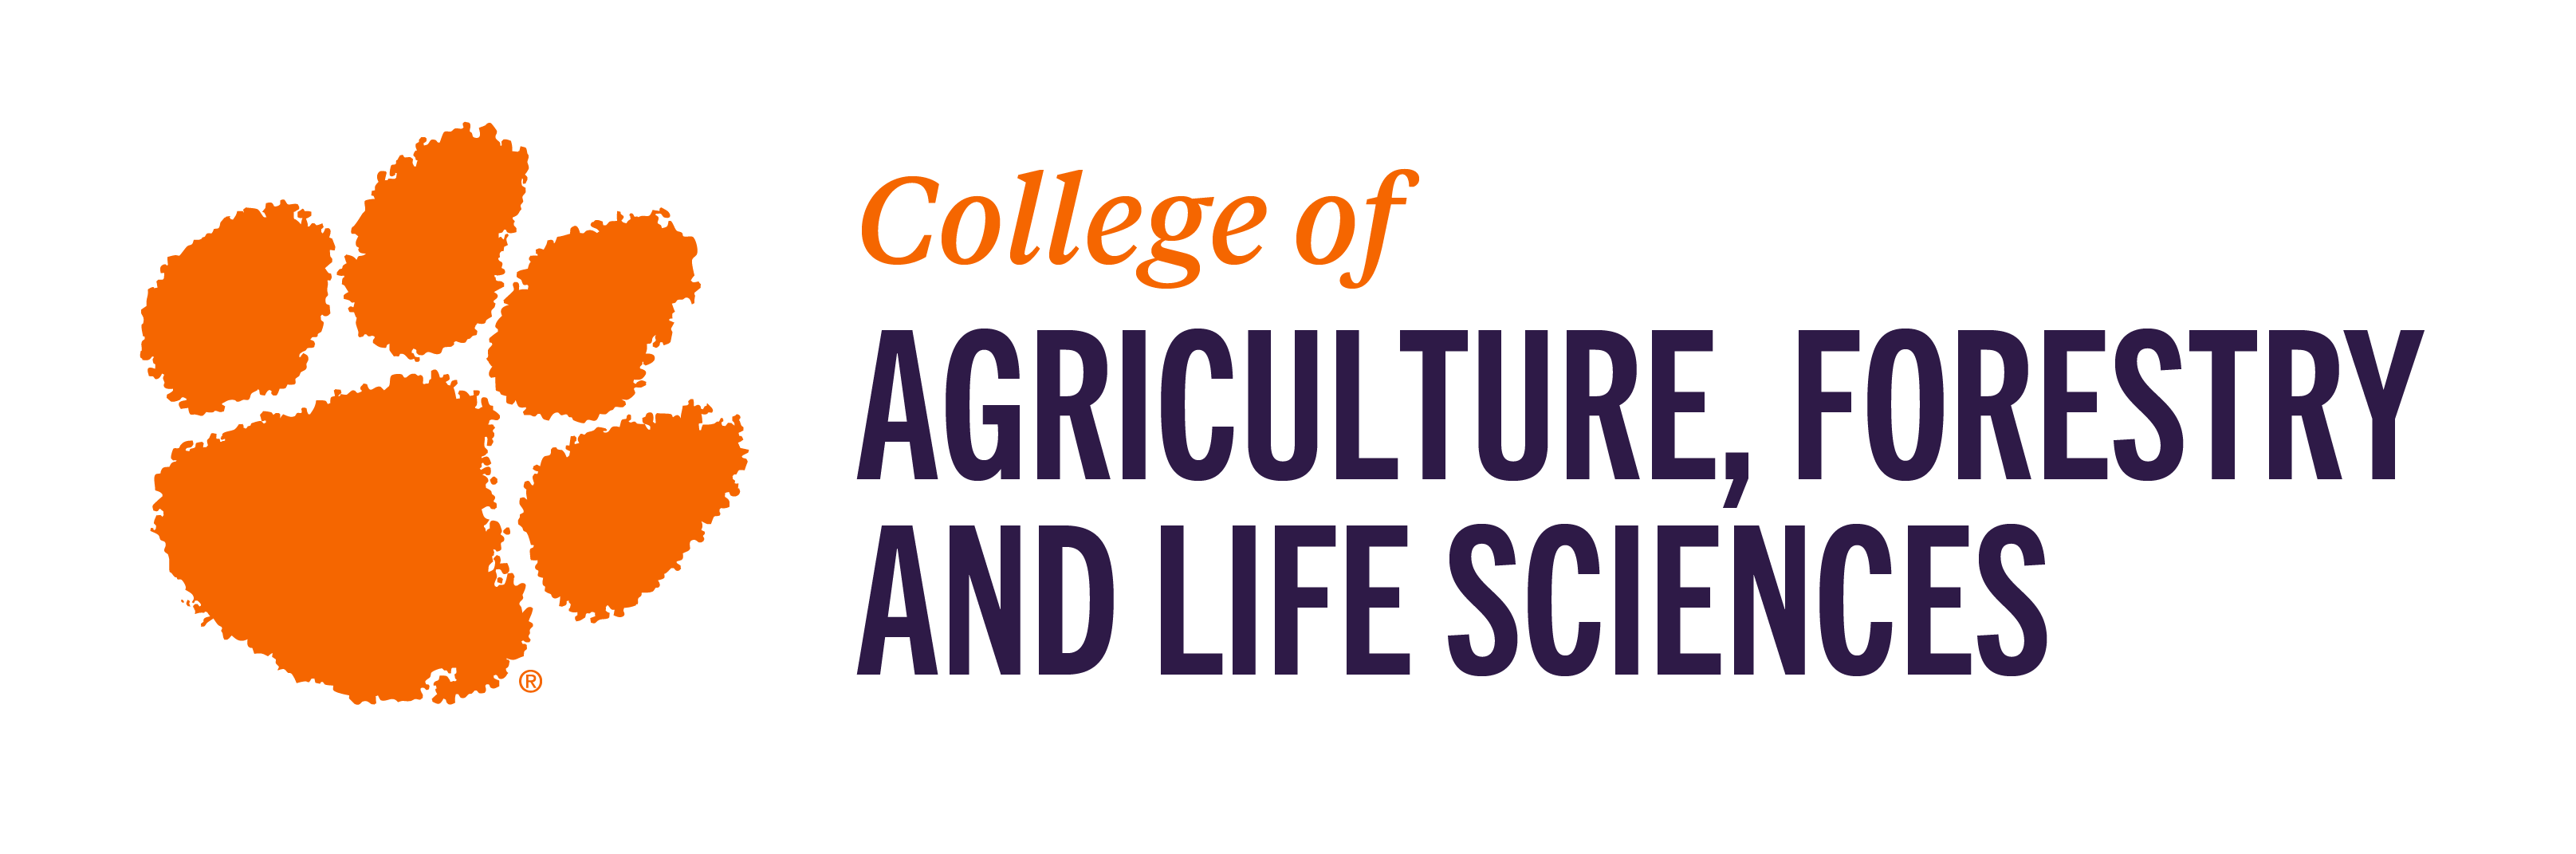 Illustration of a tiger paw and words College of agriculture forestry and life sciences